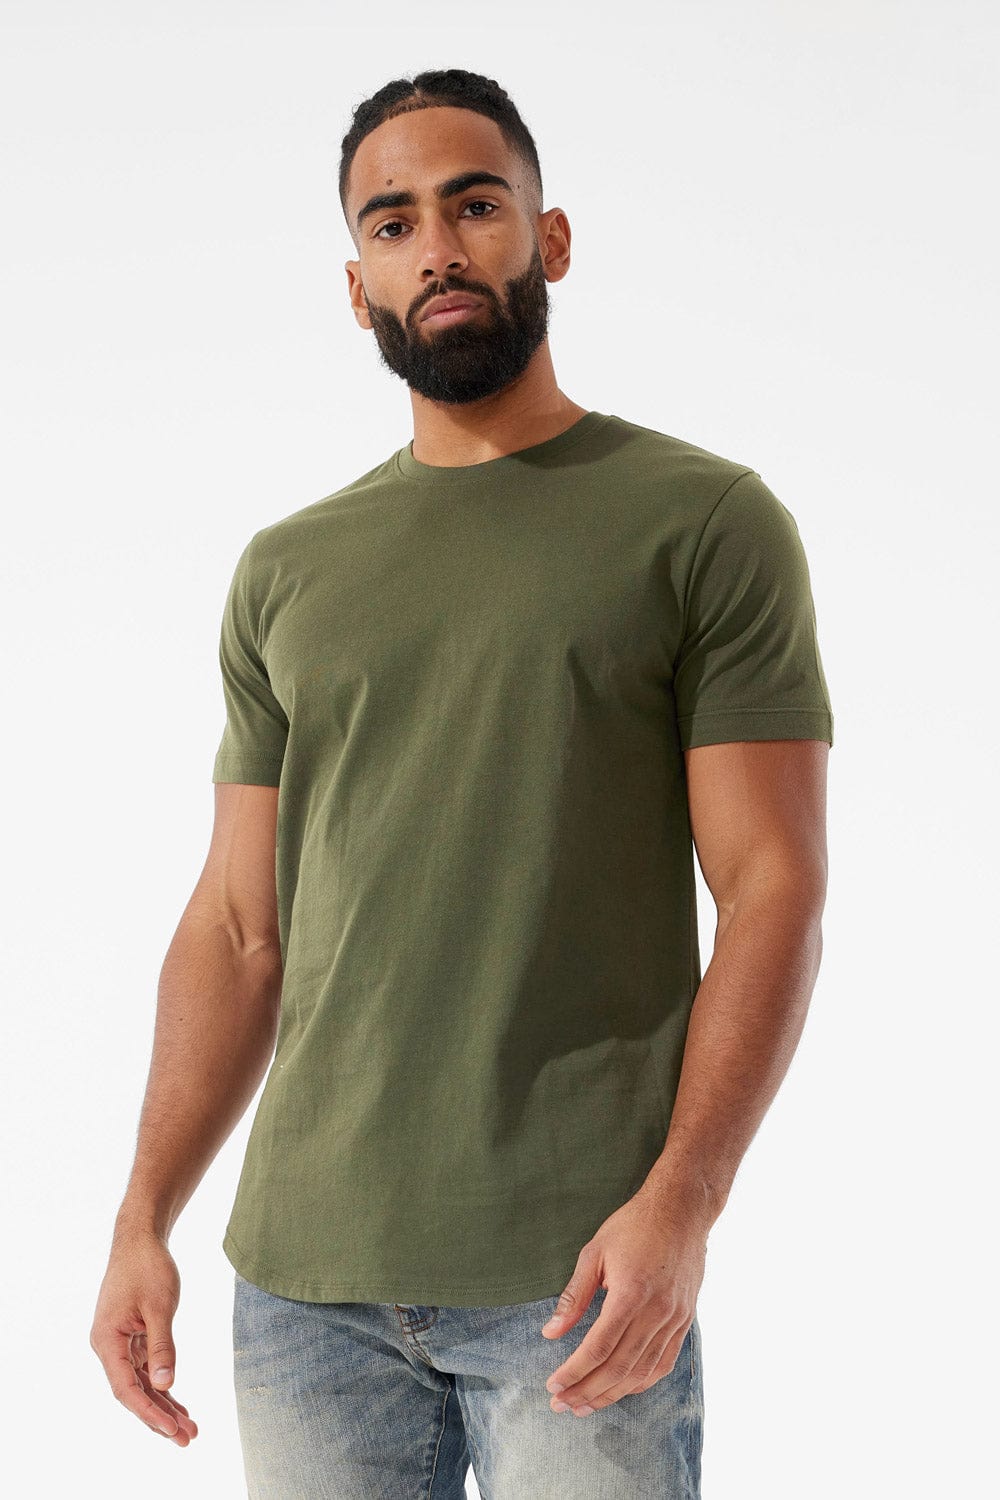 SCALLOP T-SHIRT 3 PACK (EARTH TONE)